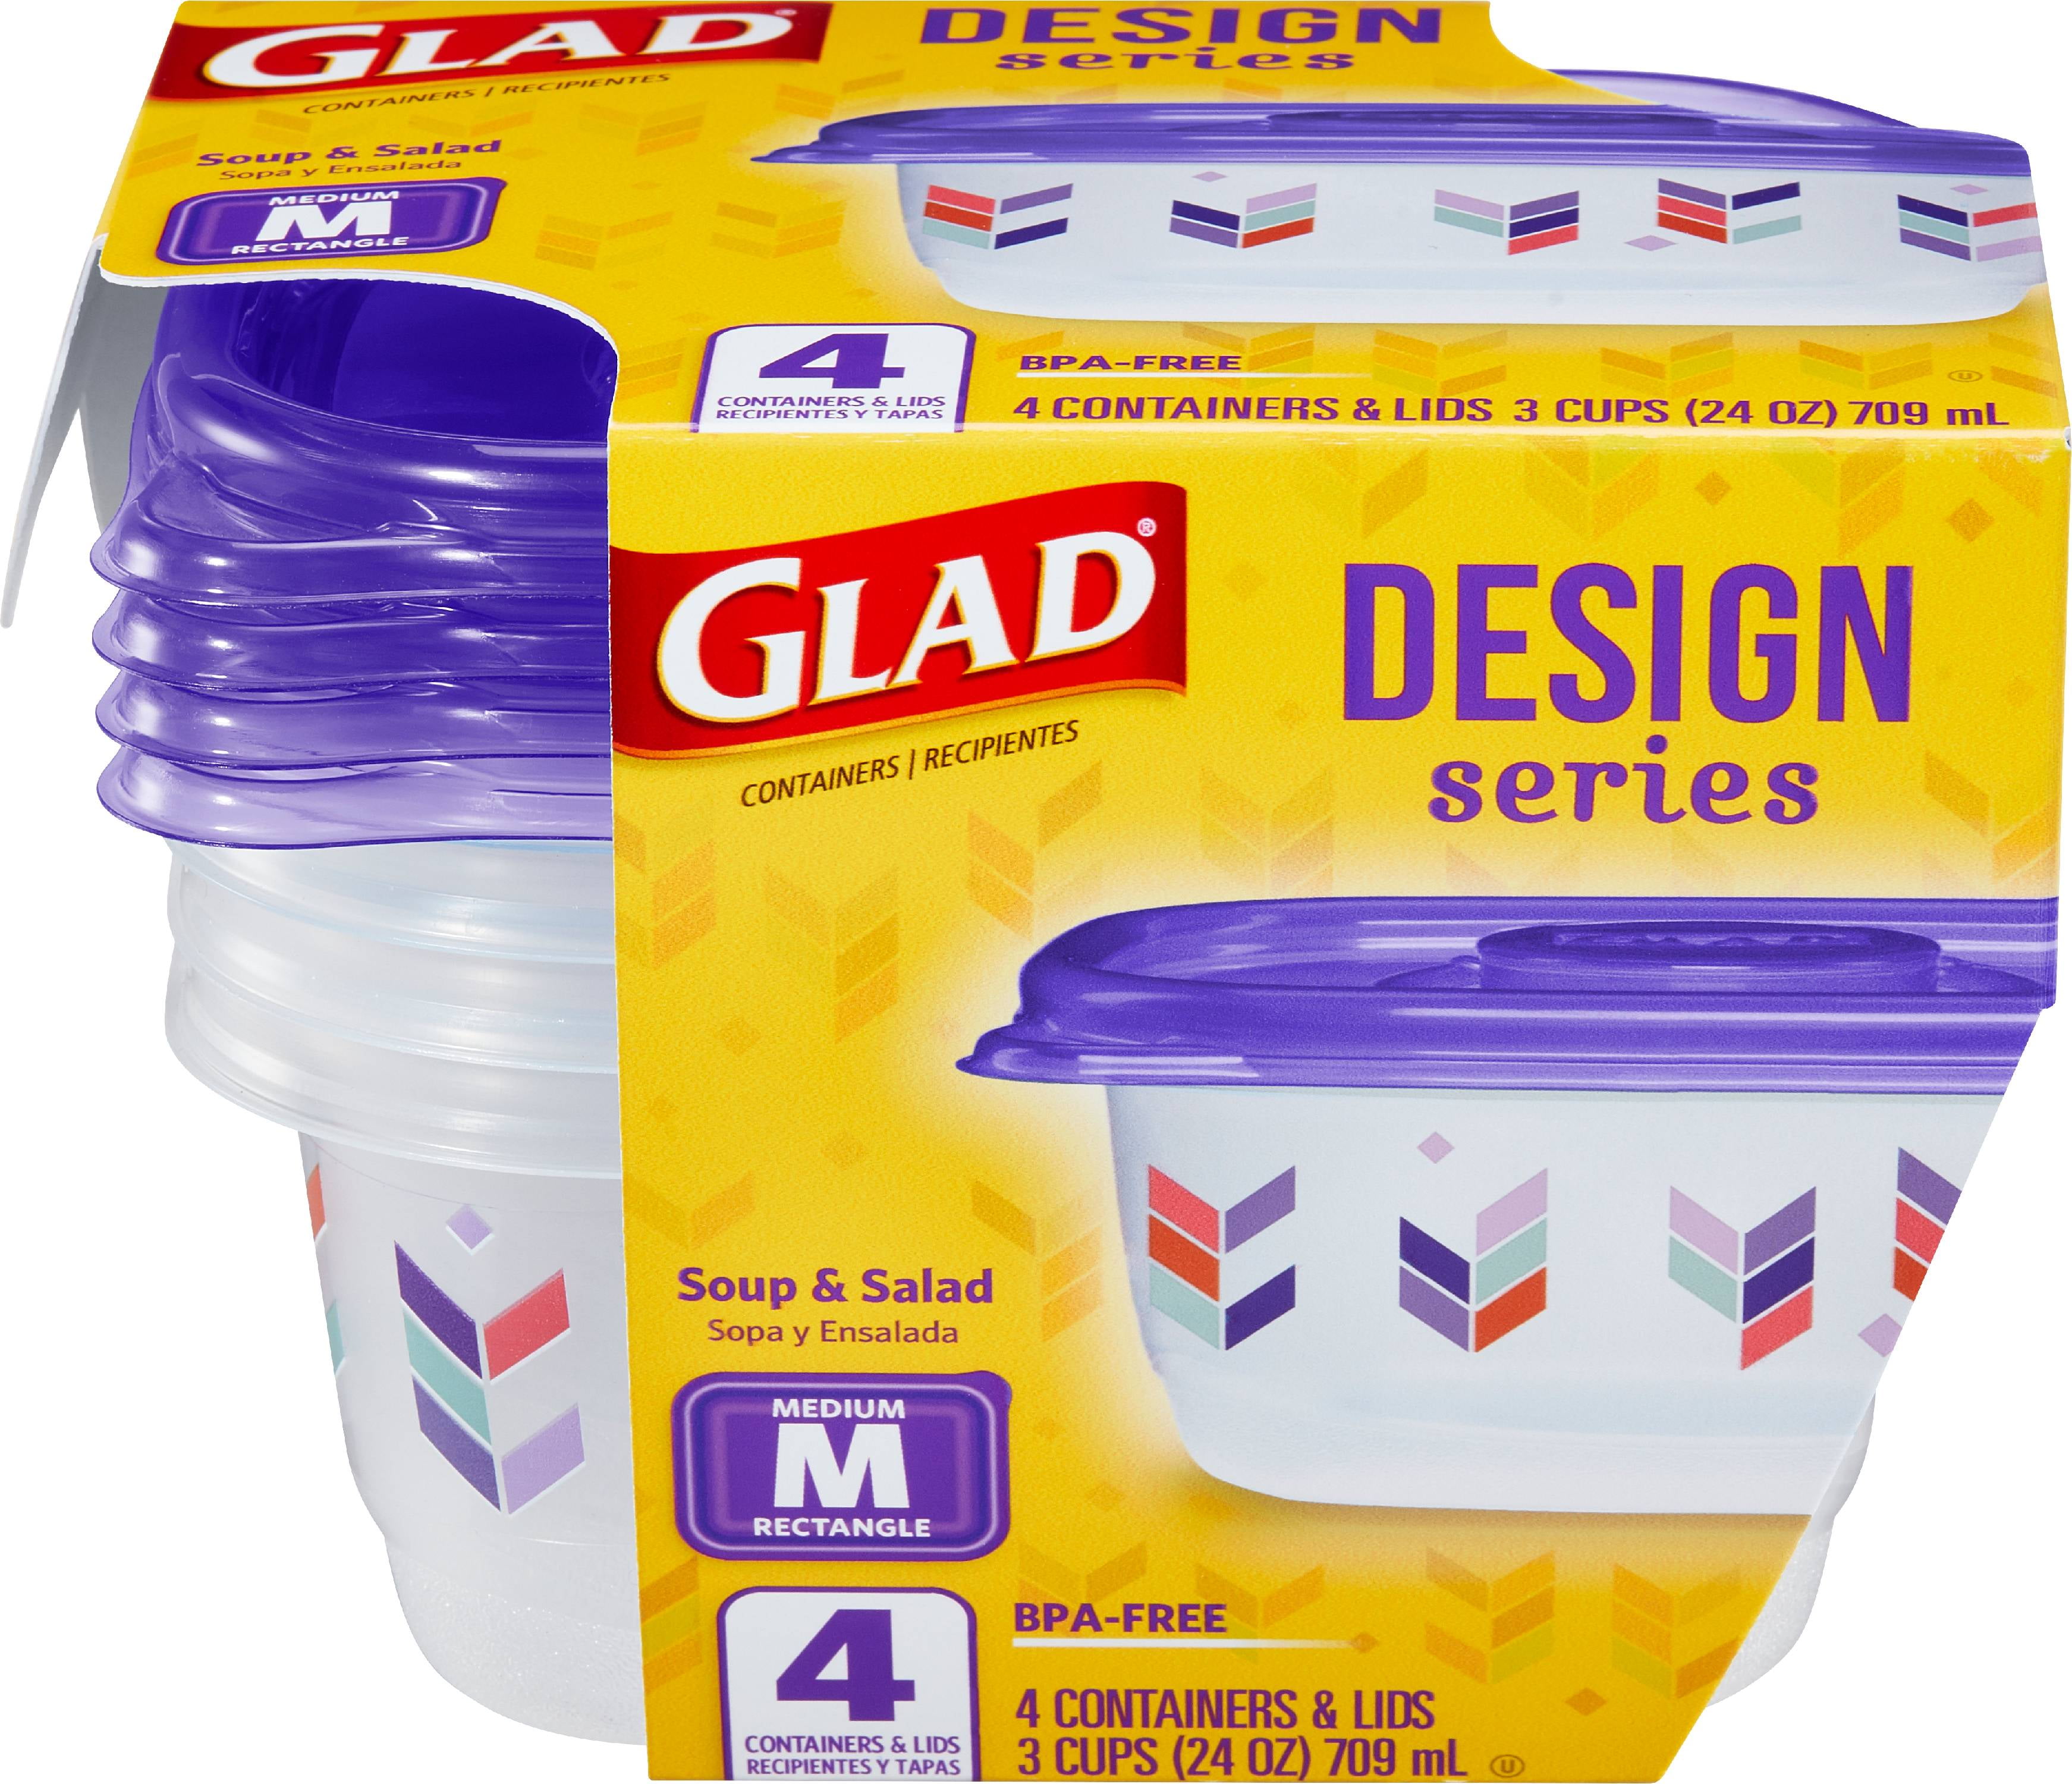 Glad Food Storage Containers, Soup and Salad, 24 Ounce, 5 Count